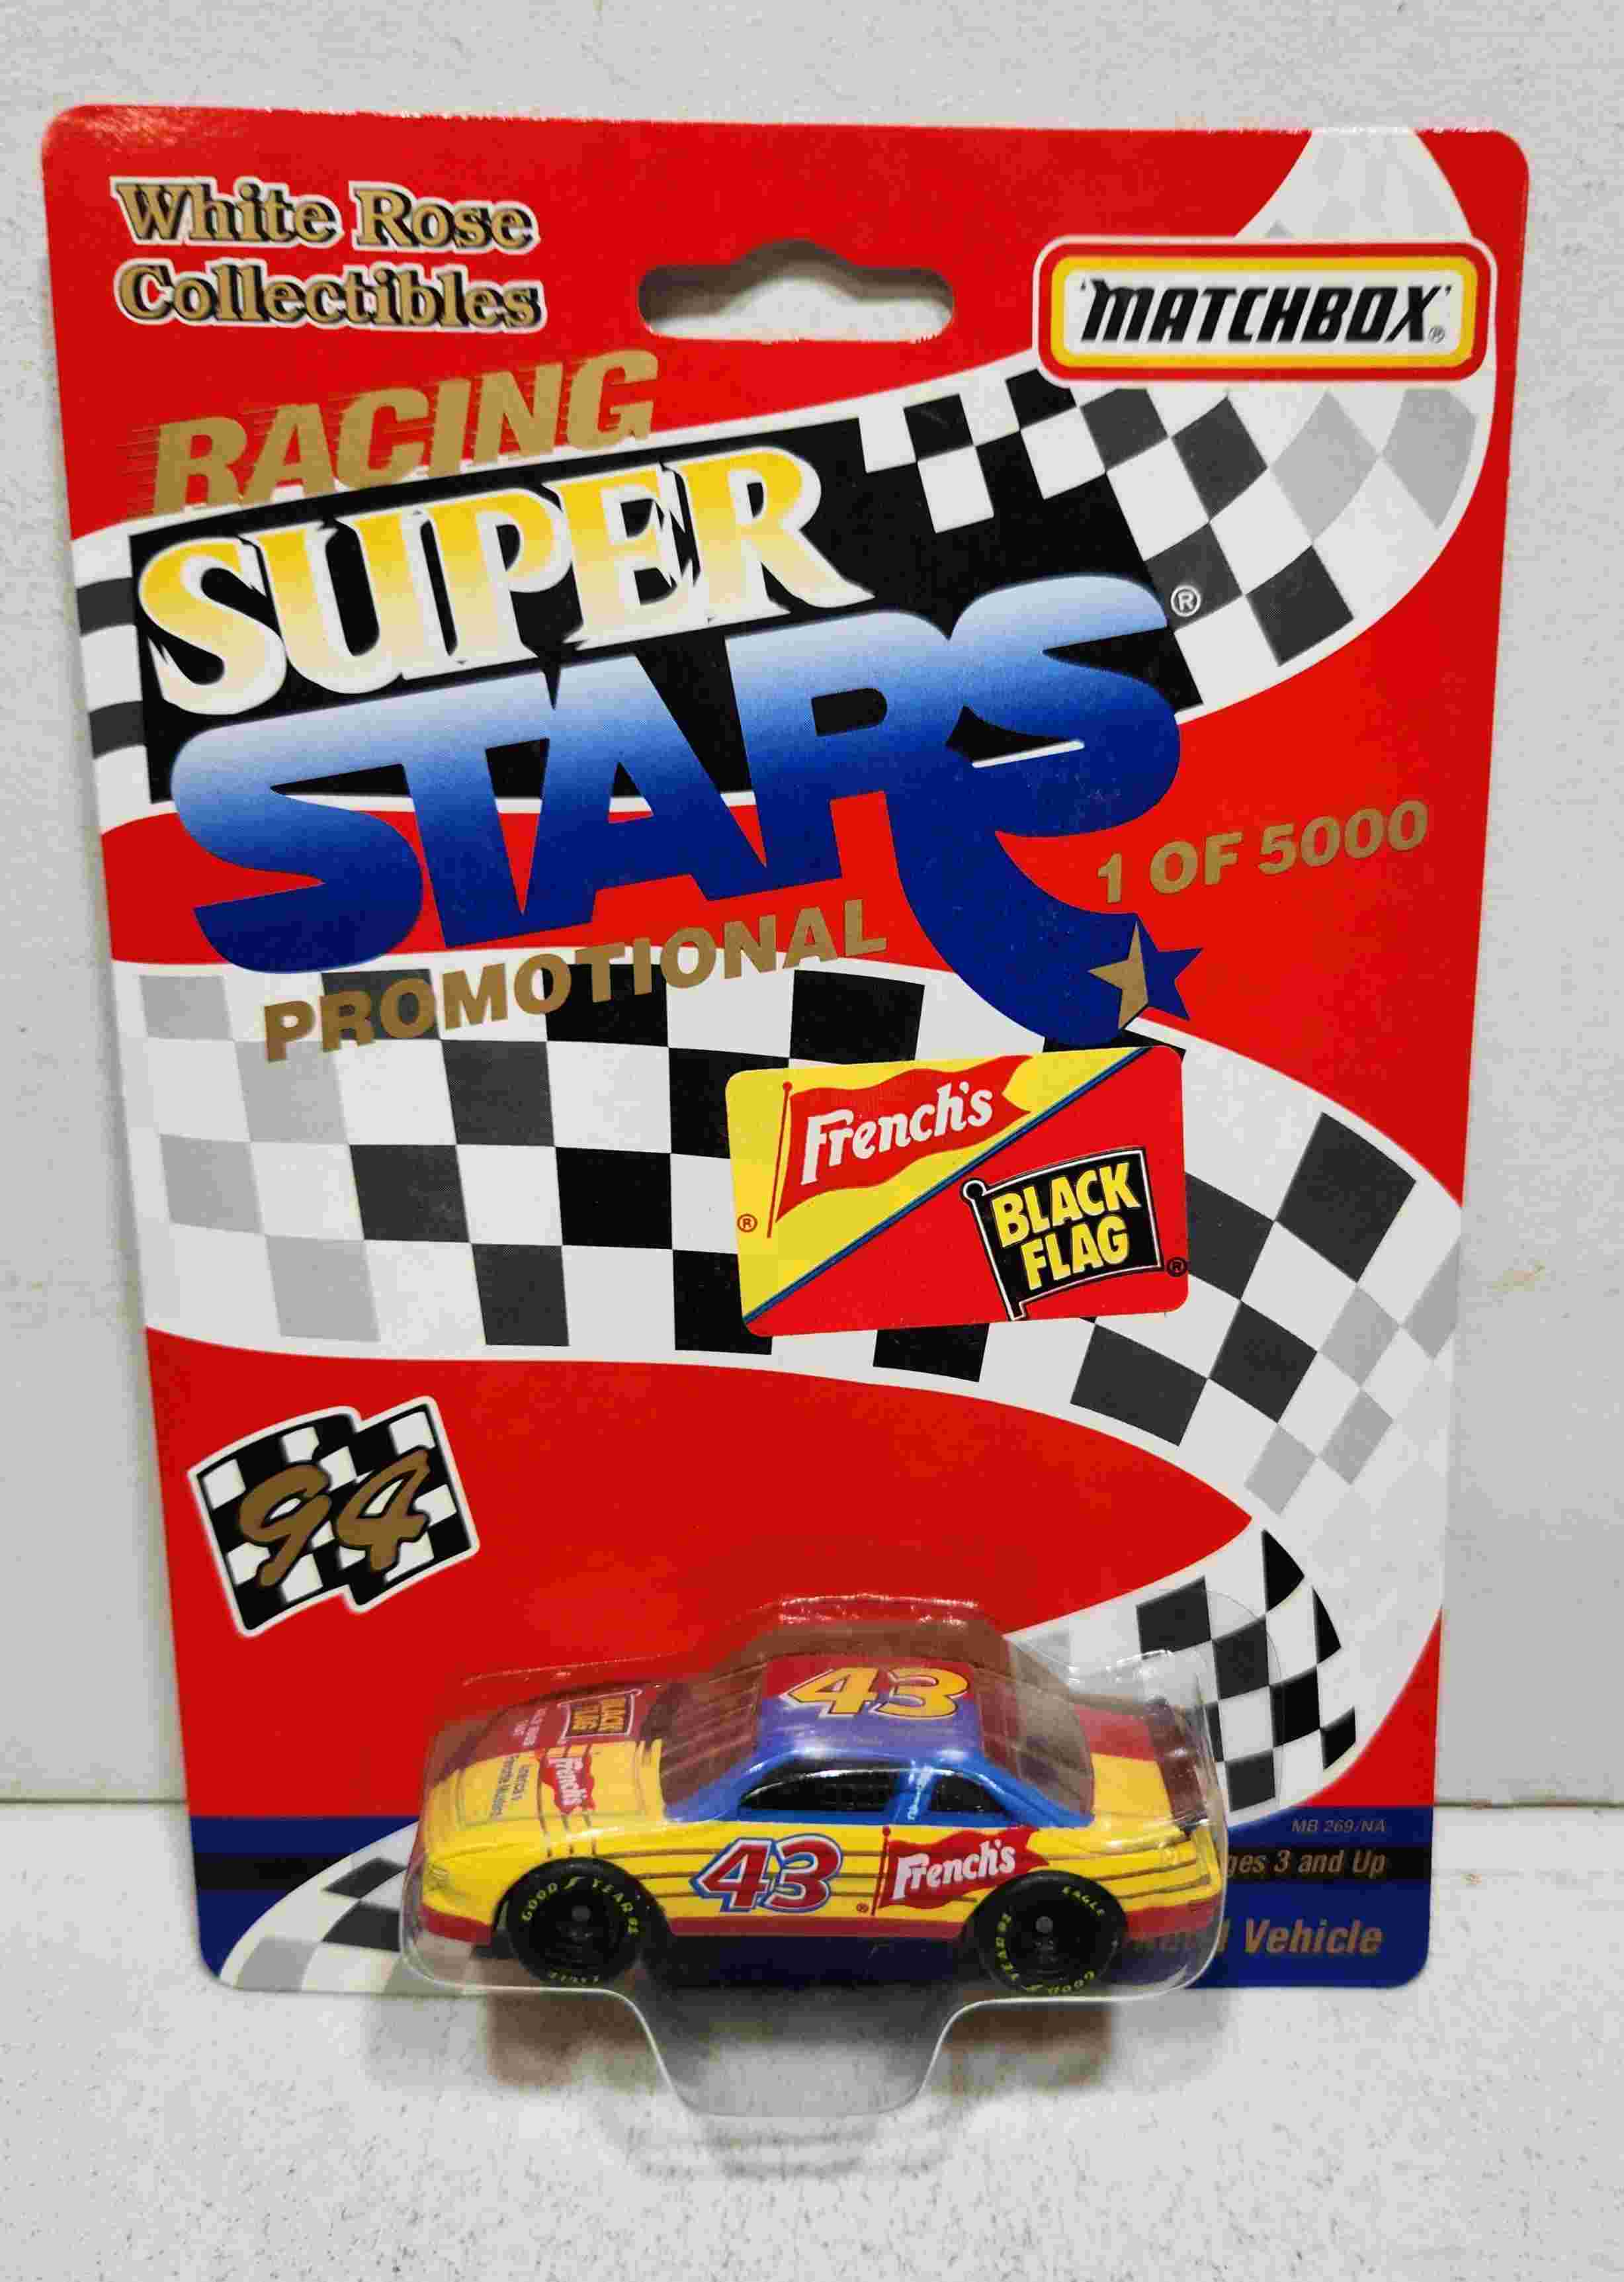 1994 Rodney Combs 1/64th French's Black Flag "Busch Series" Promo car